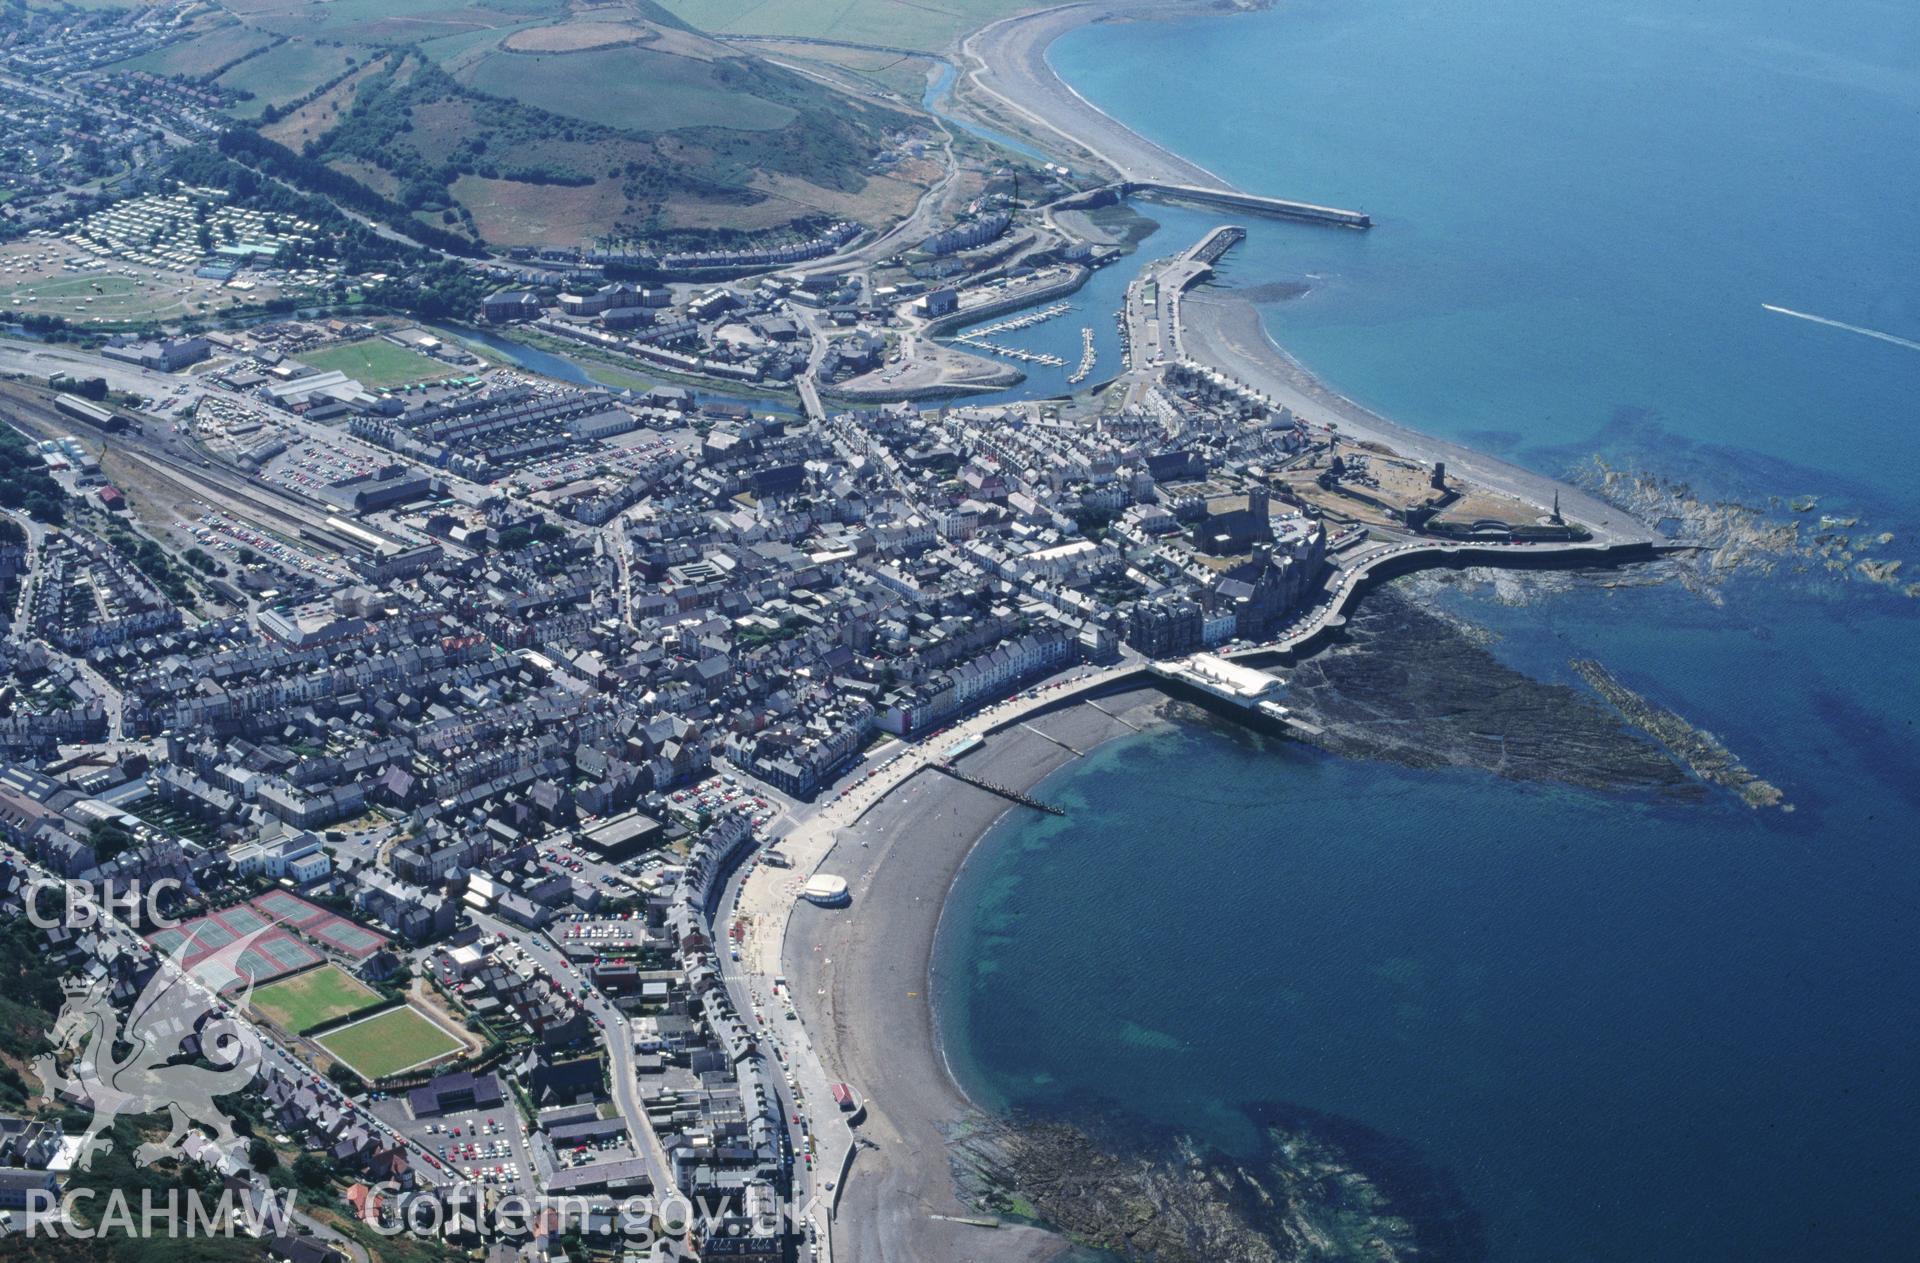 Slide of RCAHMW colour oblique aerial photograph of Aberystwyth, taken by C.R. Musson, 9/8/1995.